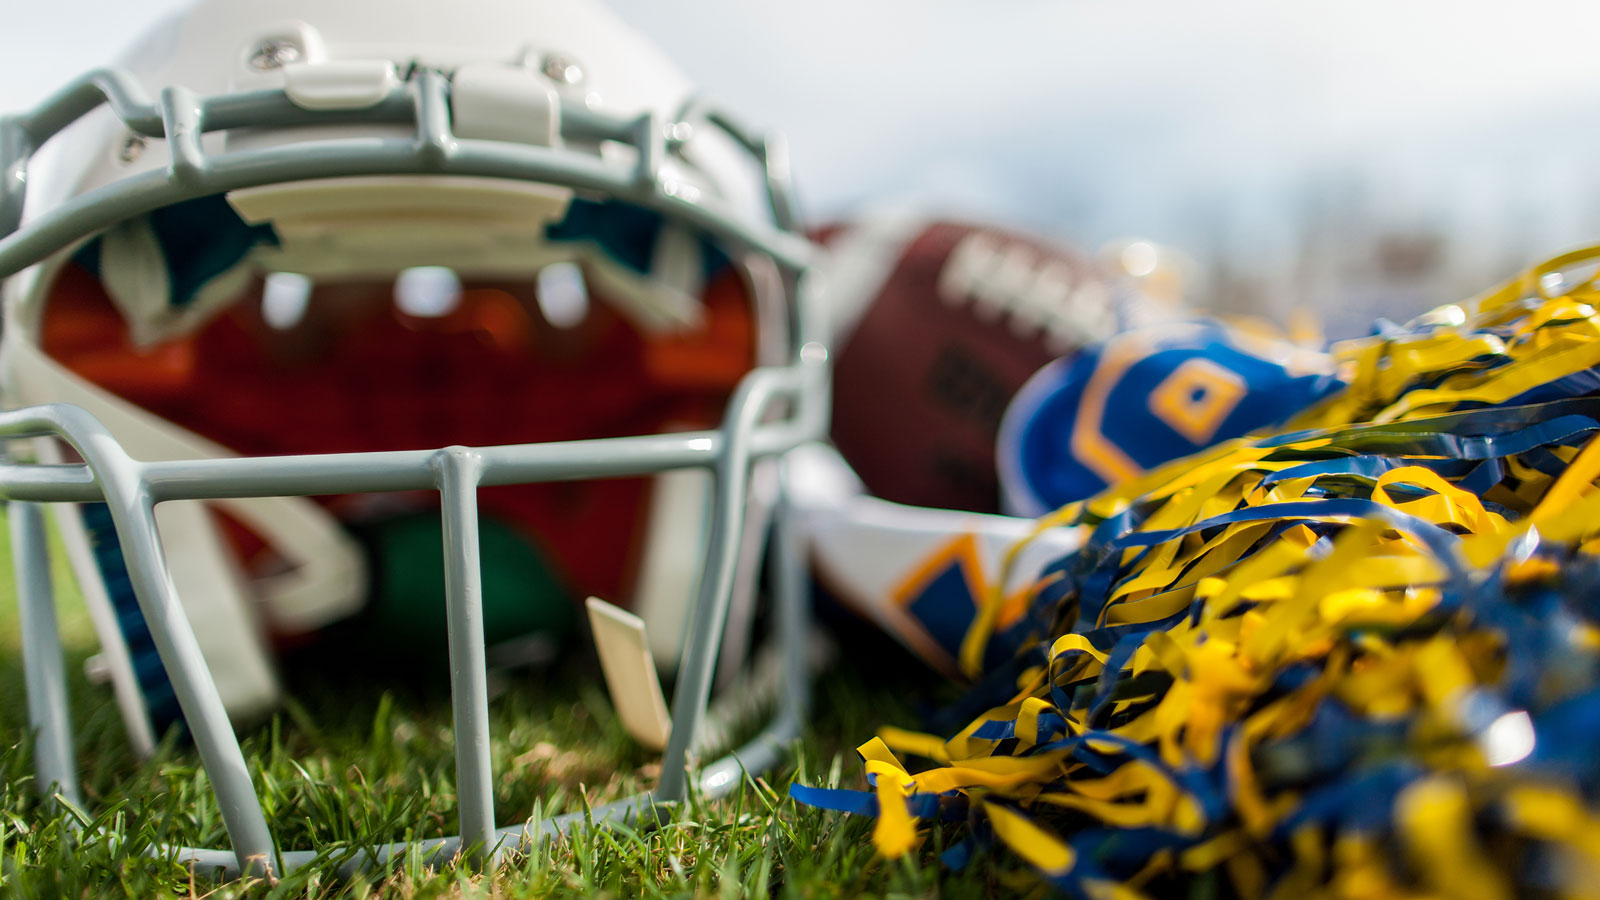 This picture is of a football helmet and pom poms to promote the tailgate event.